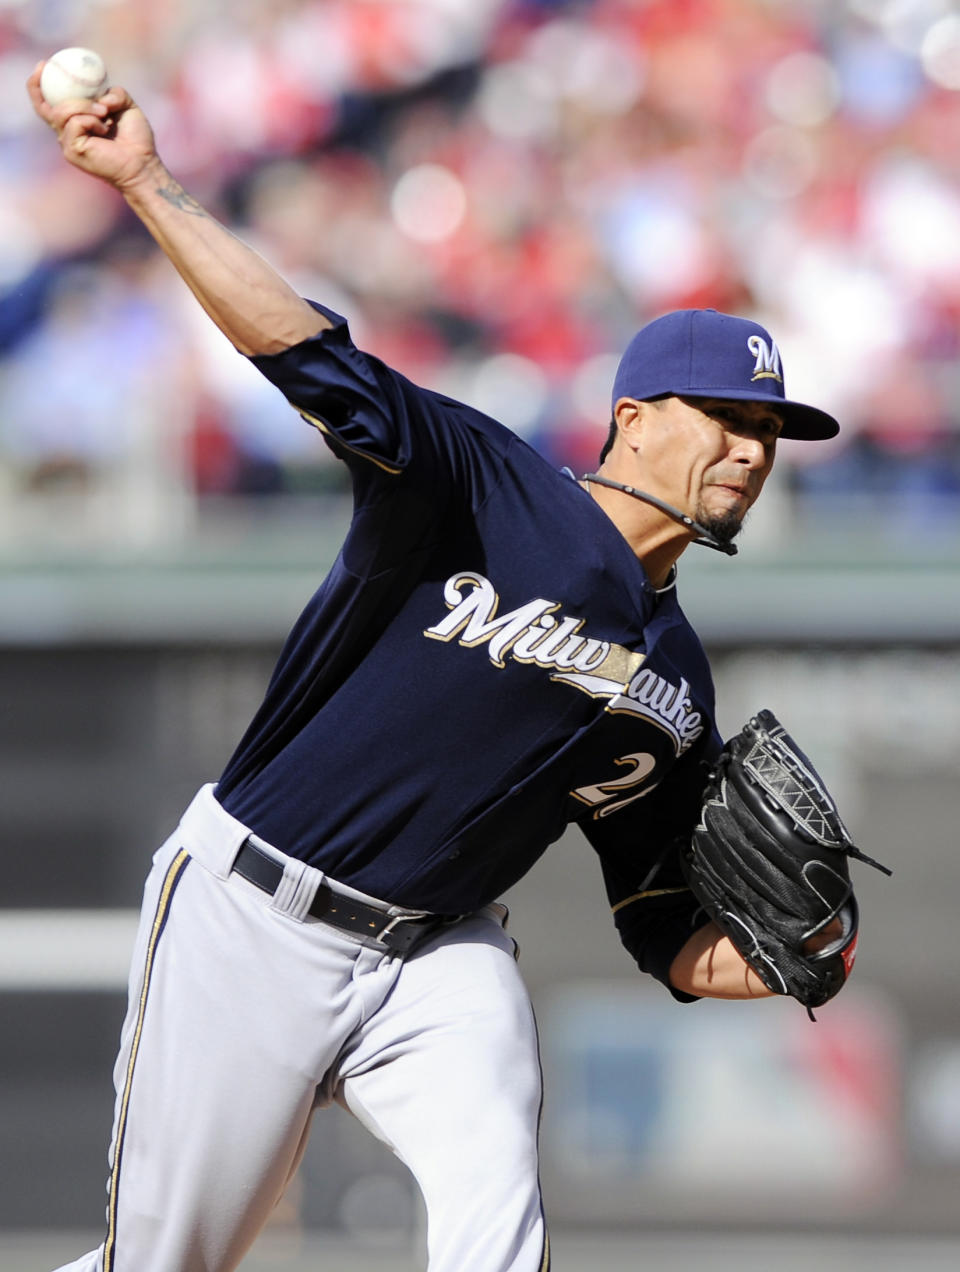 Milwaukee Brewers starting pitcher Kyle Lohse pitches during the first inning of a baseball game against the Philadelphia Phillies on Tuesday, April 8, 2014, in Philadelphia. (AP Photo/Michael Perez)